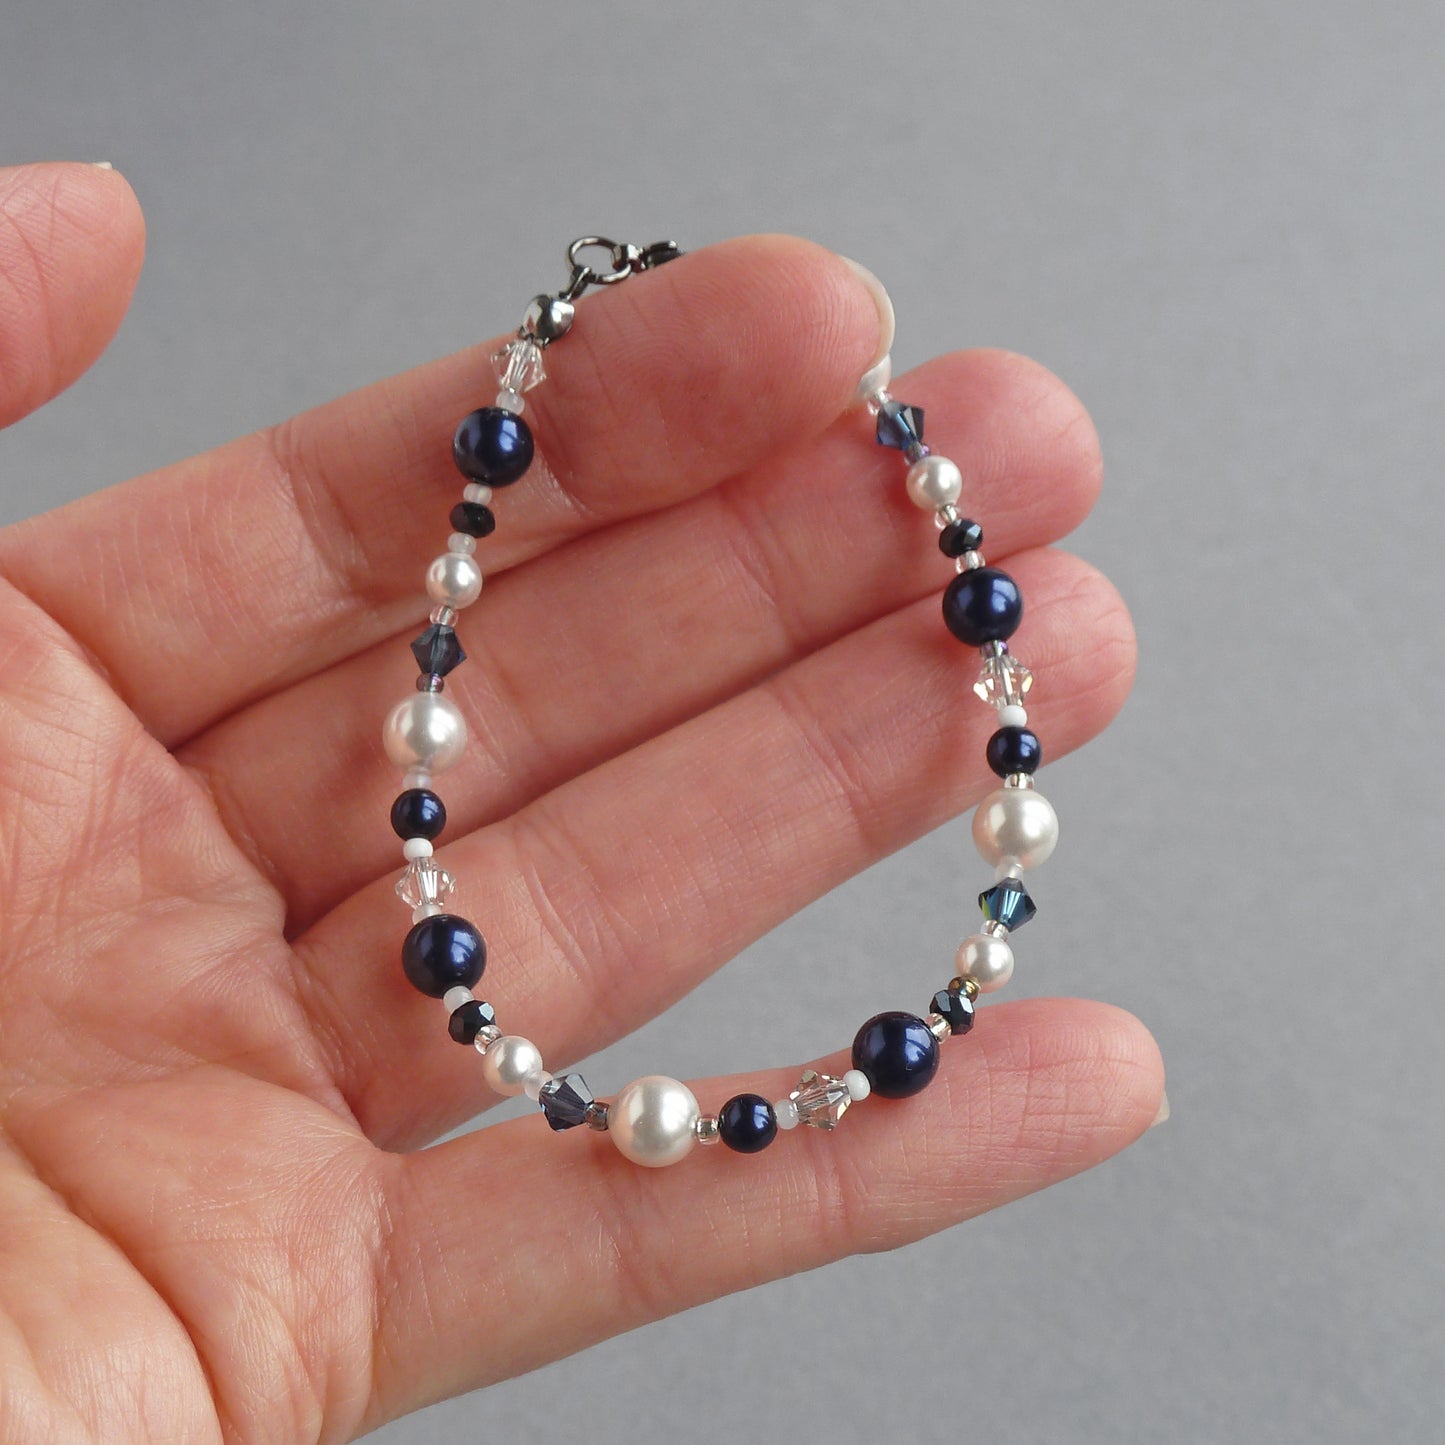 Navy and white pearl bracelet